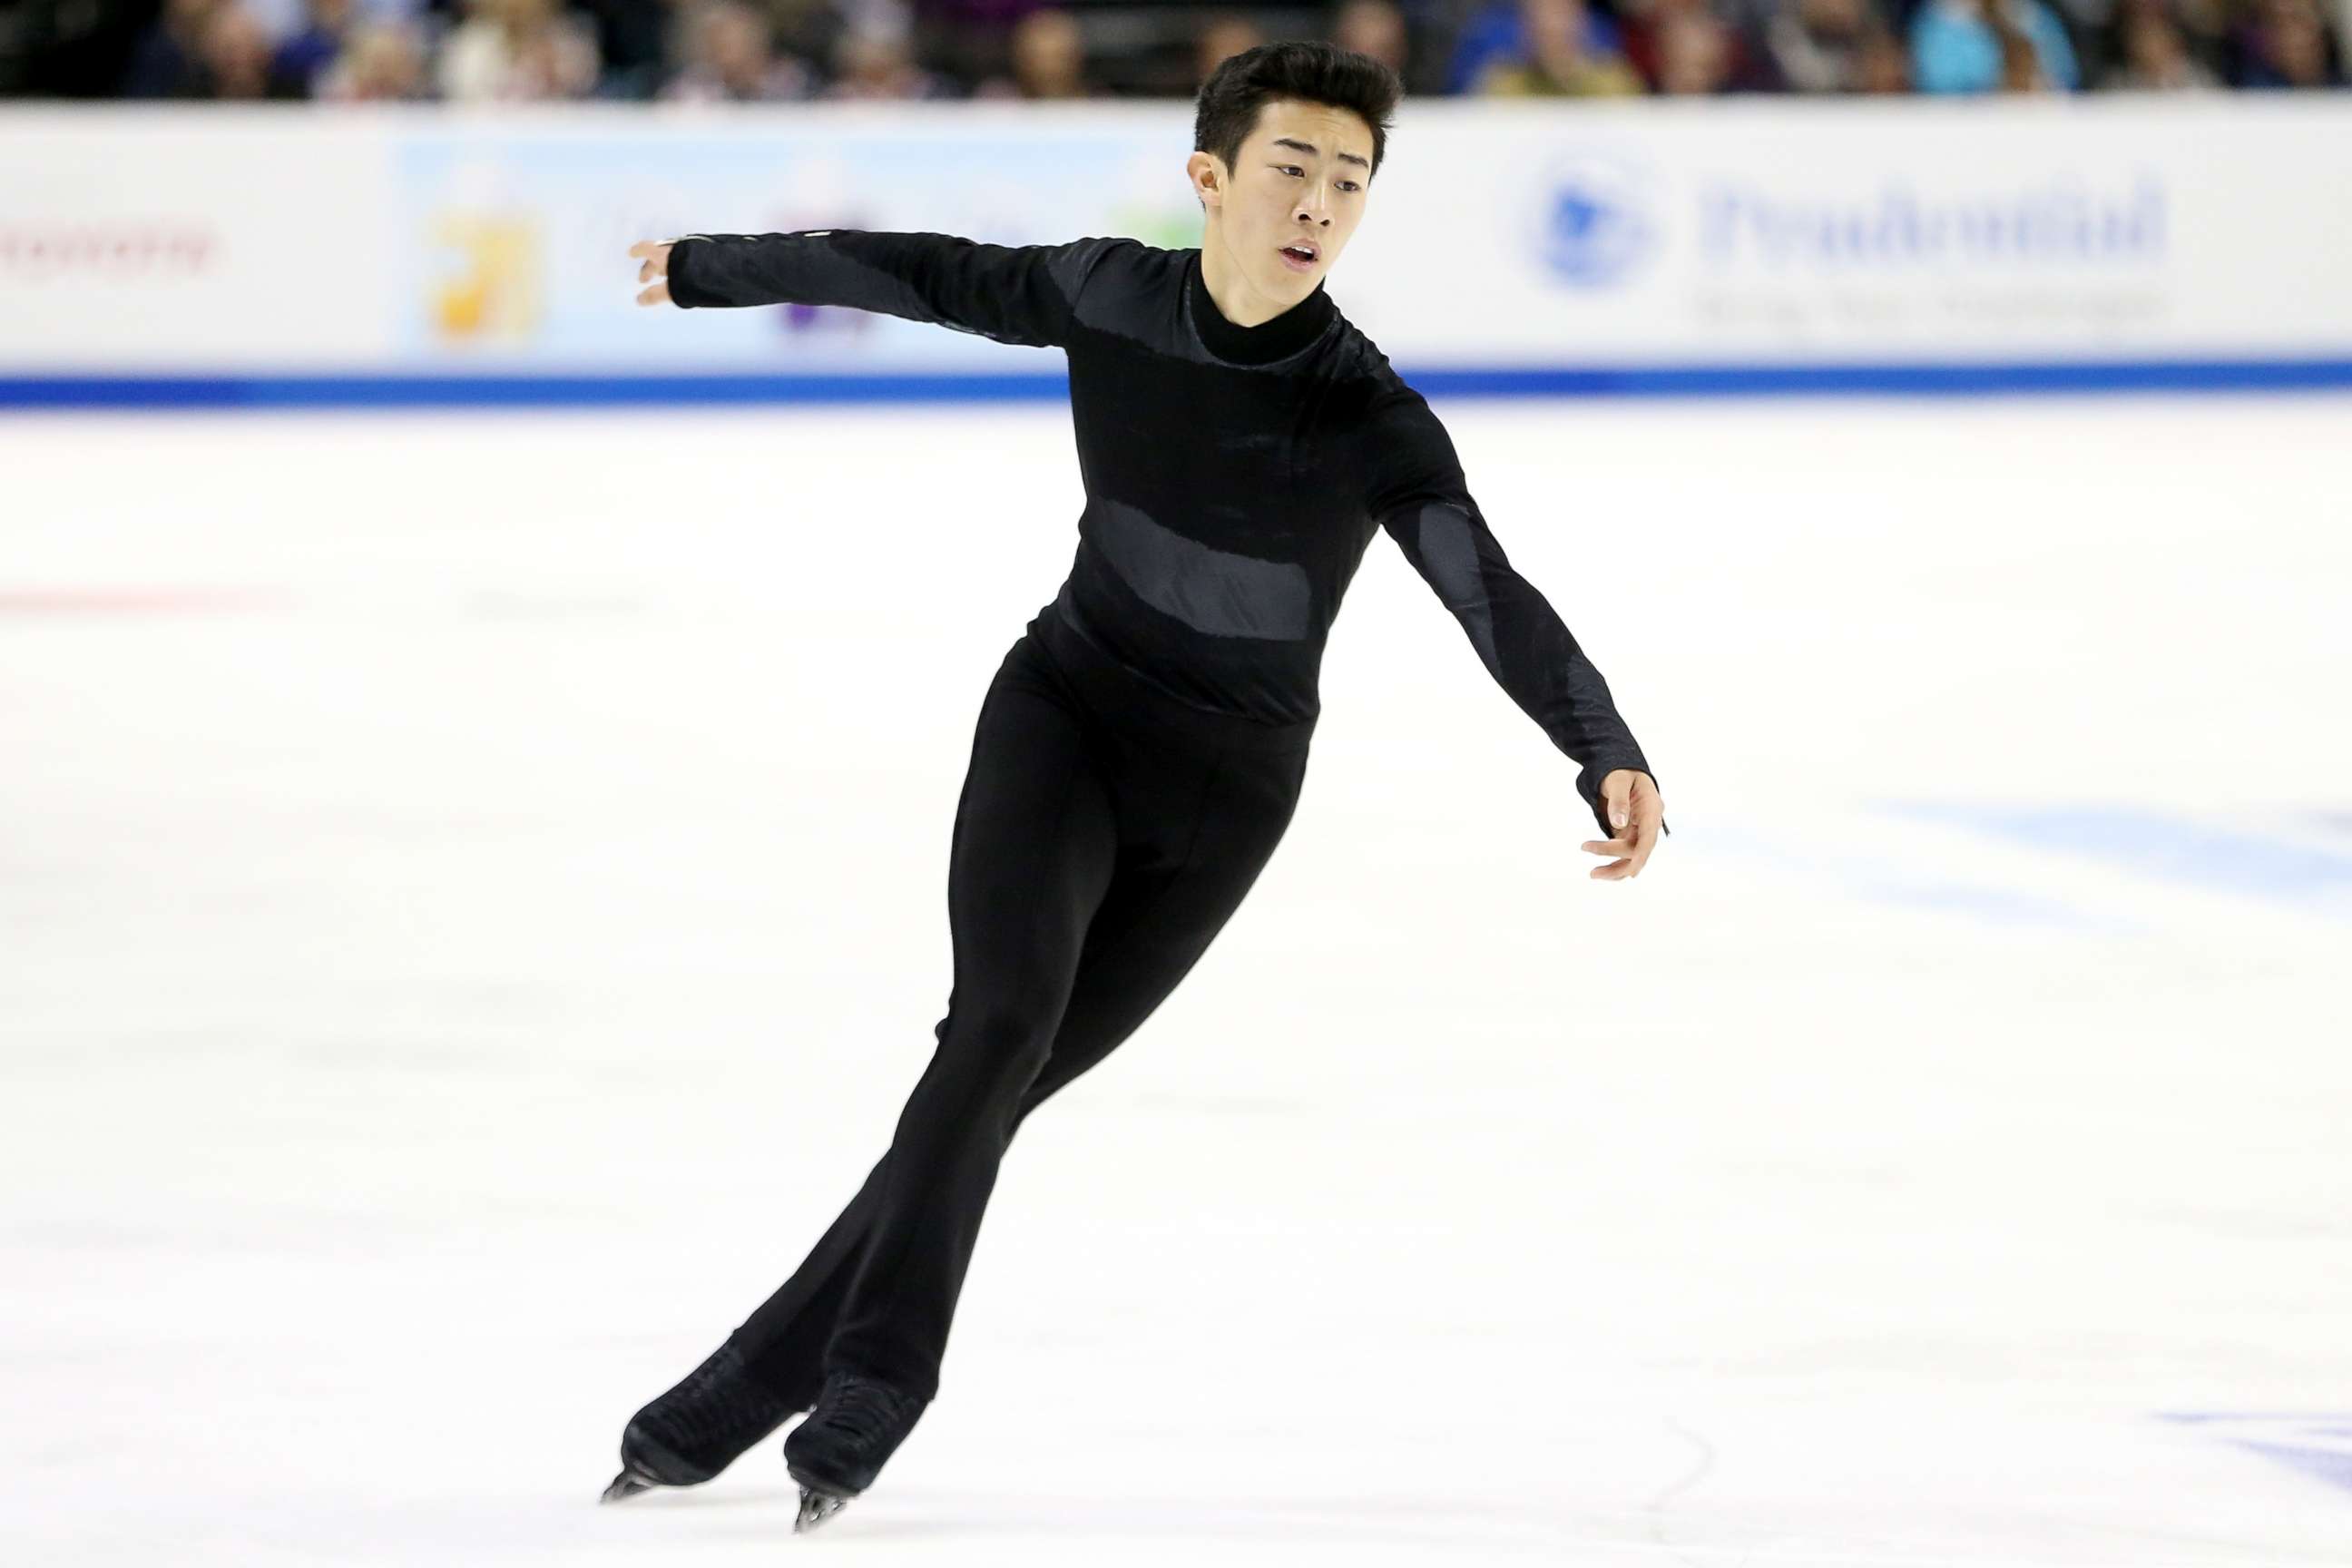 PHOTO: Nathan Chen competes in the Men's Free Skate during the 2018 Prudential U.S. Figure Skating Championships at the SAP Center on Jan. 6, 2018 in San Jose, Calif.